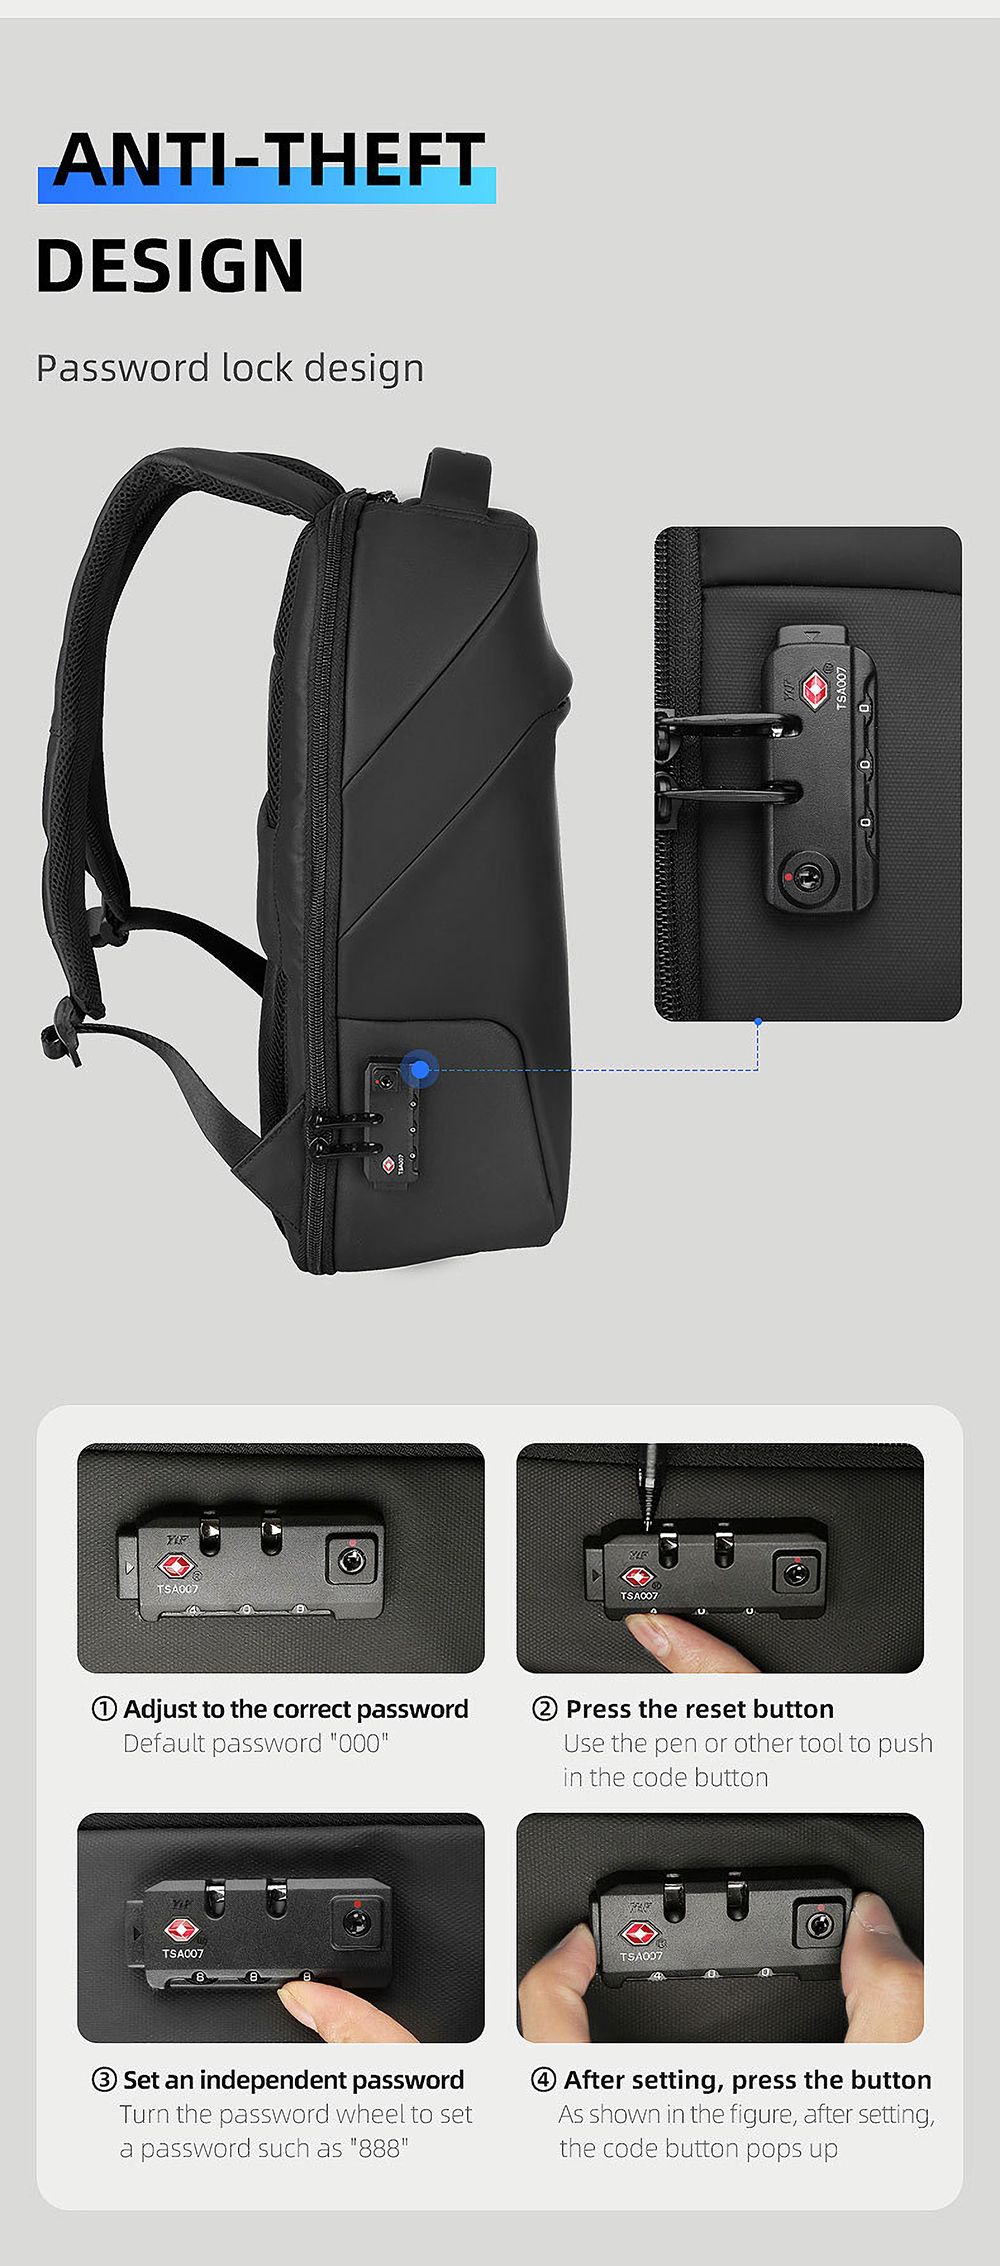 MARK-RYDEN-156-inch-Laptop-Bag-Waterproof-Backpack-Business-Anti-theft-USB-Charging-Travel-Backpack--1609266